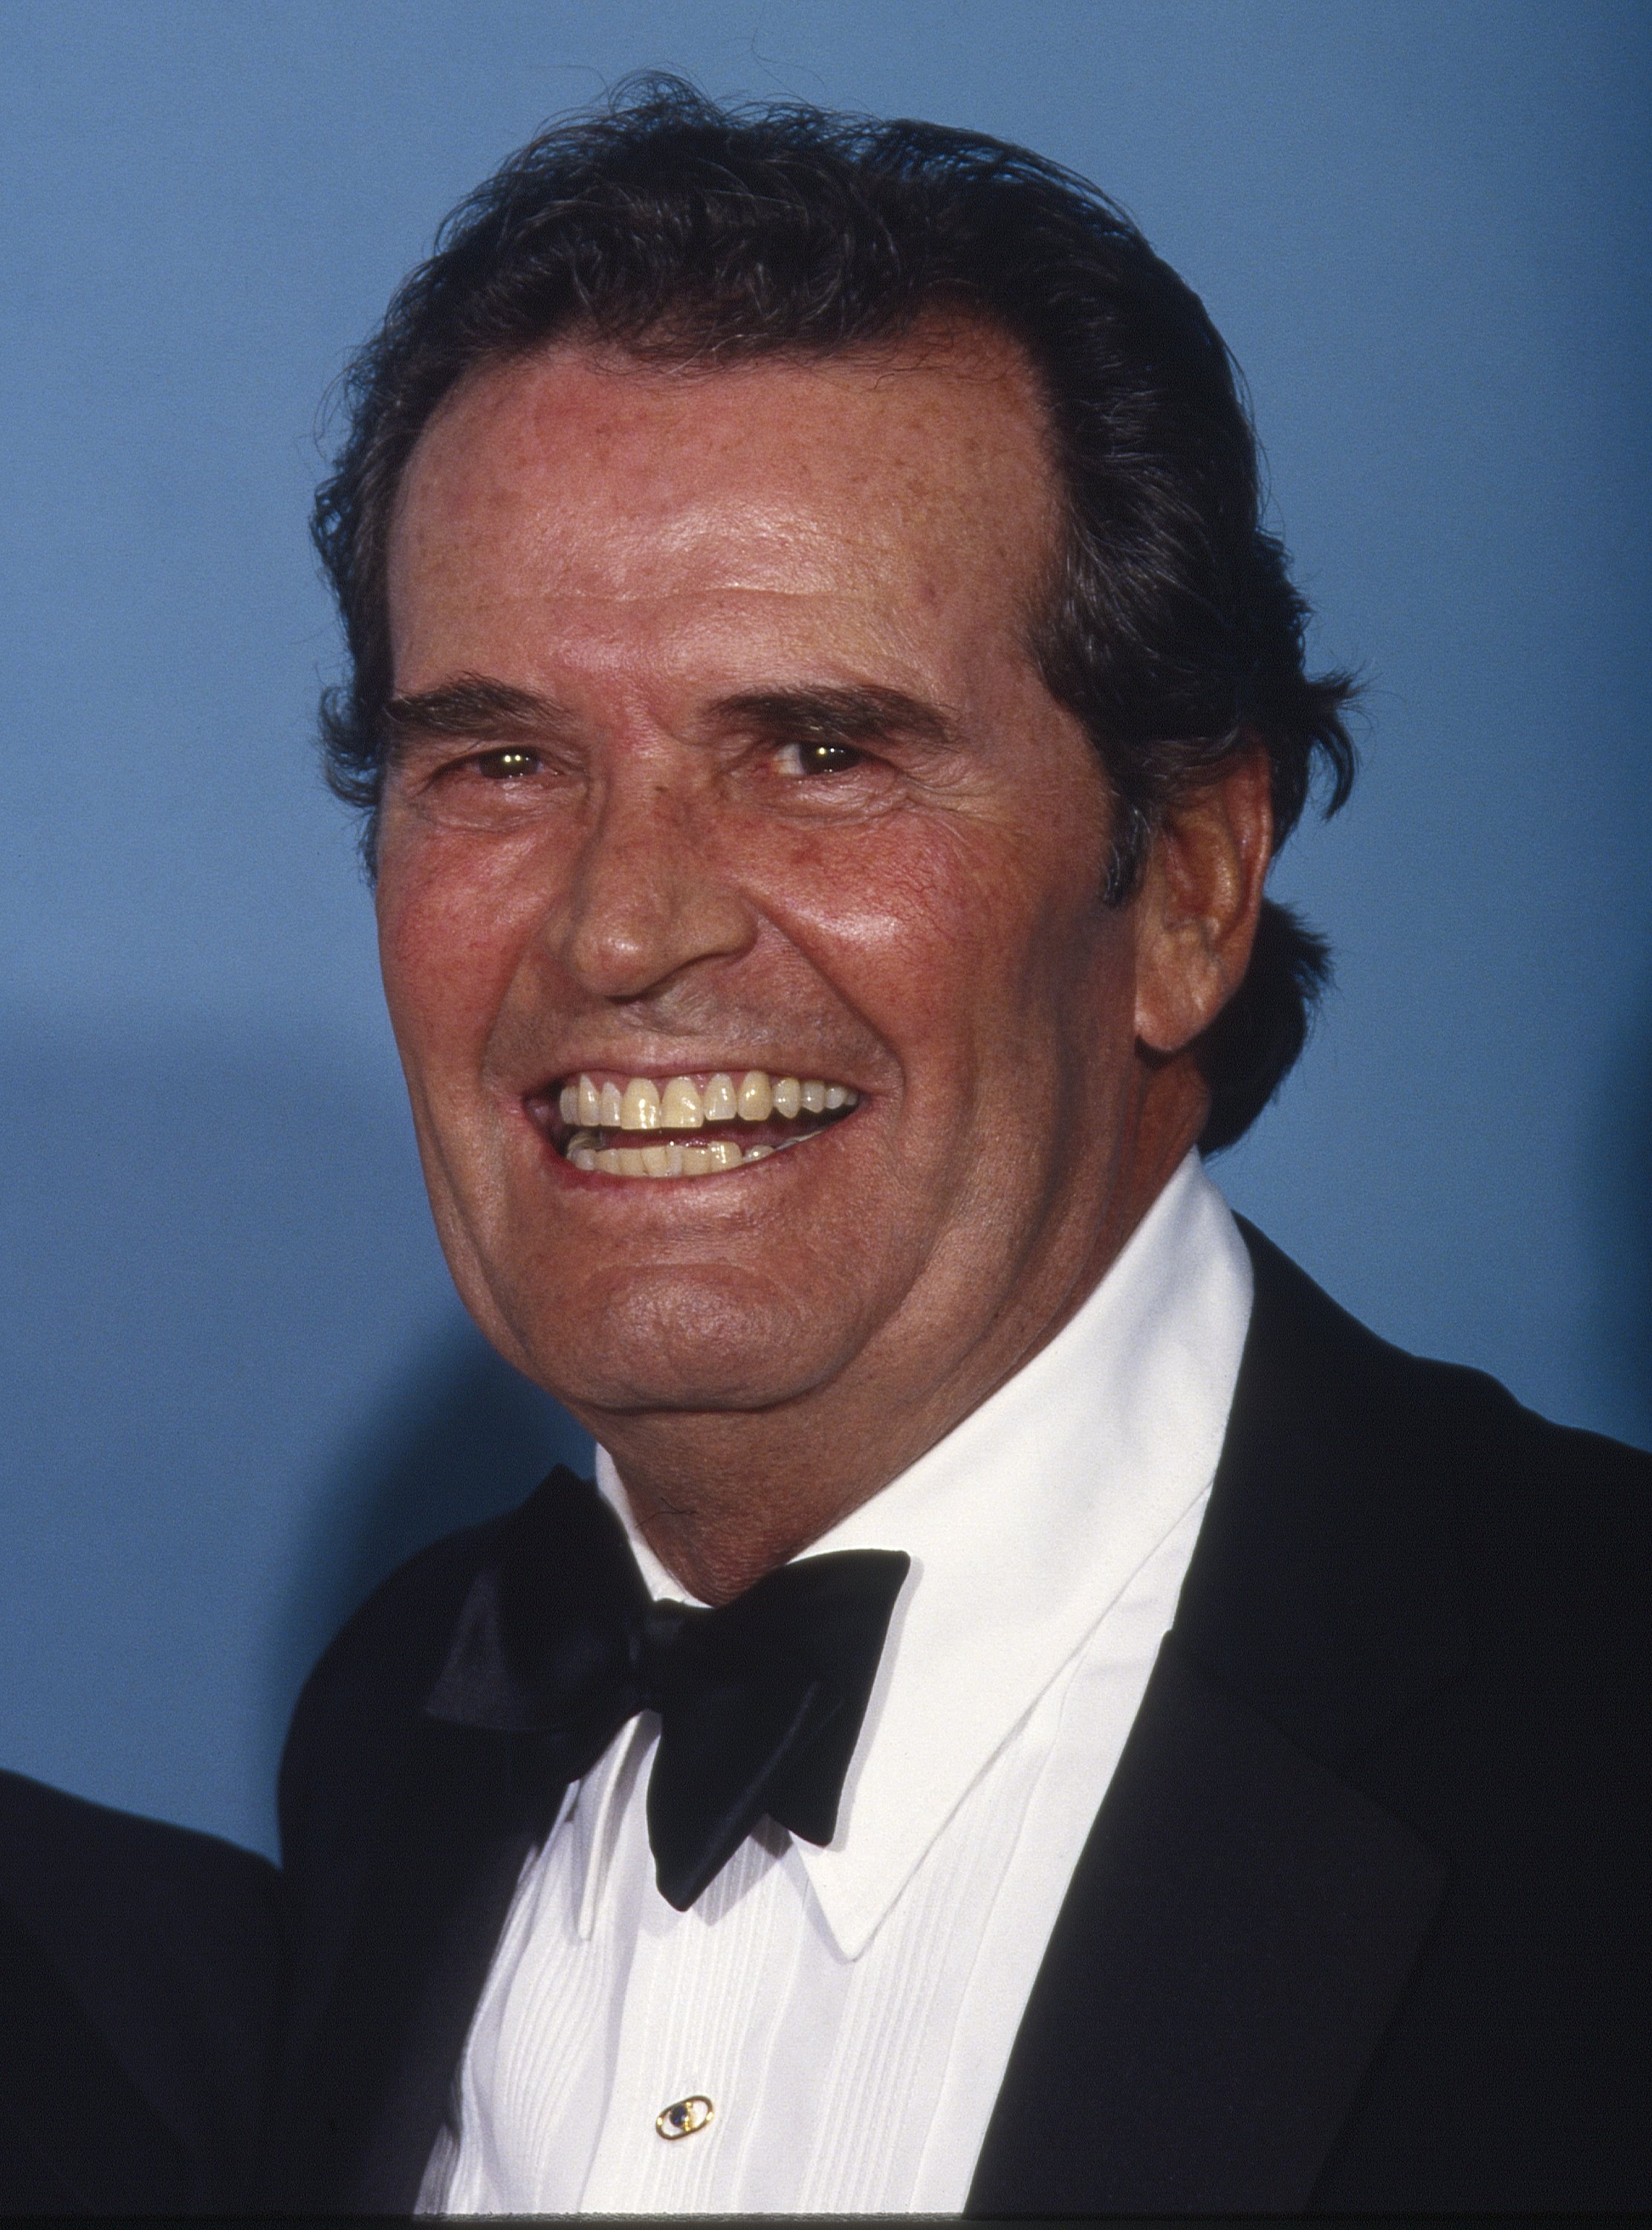 James Garner, his wife Lois Garner, and daughters Kimberly Garner and Greta Garner were sighted on April 7, 1980, at Le Dome Restaurant in West Hollywood, California. | Source: Getty Images